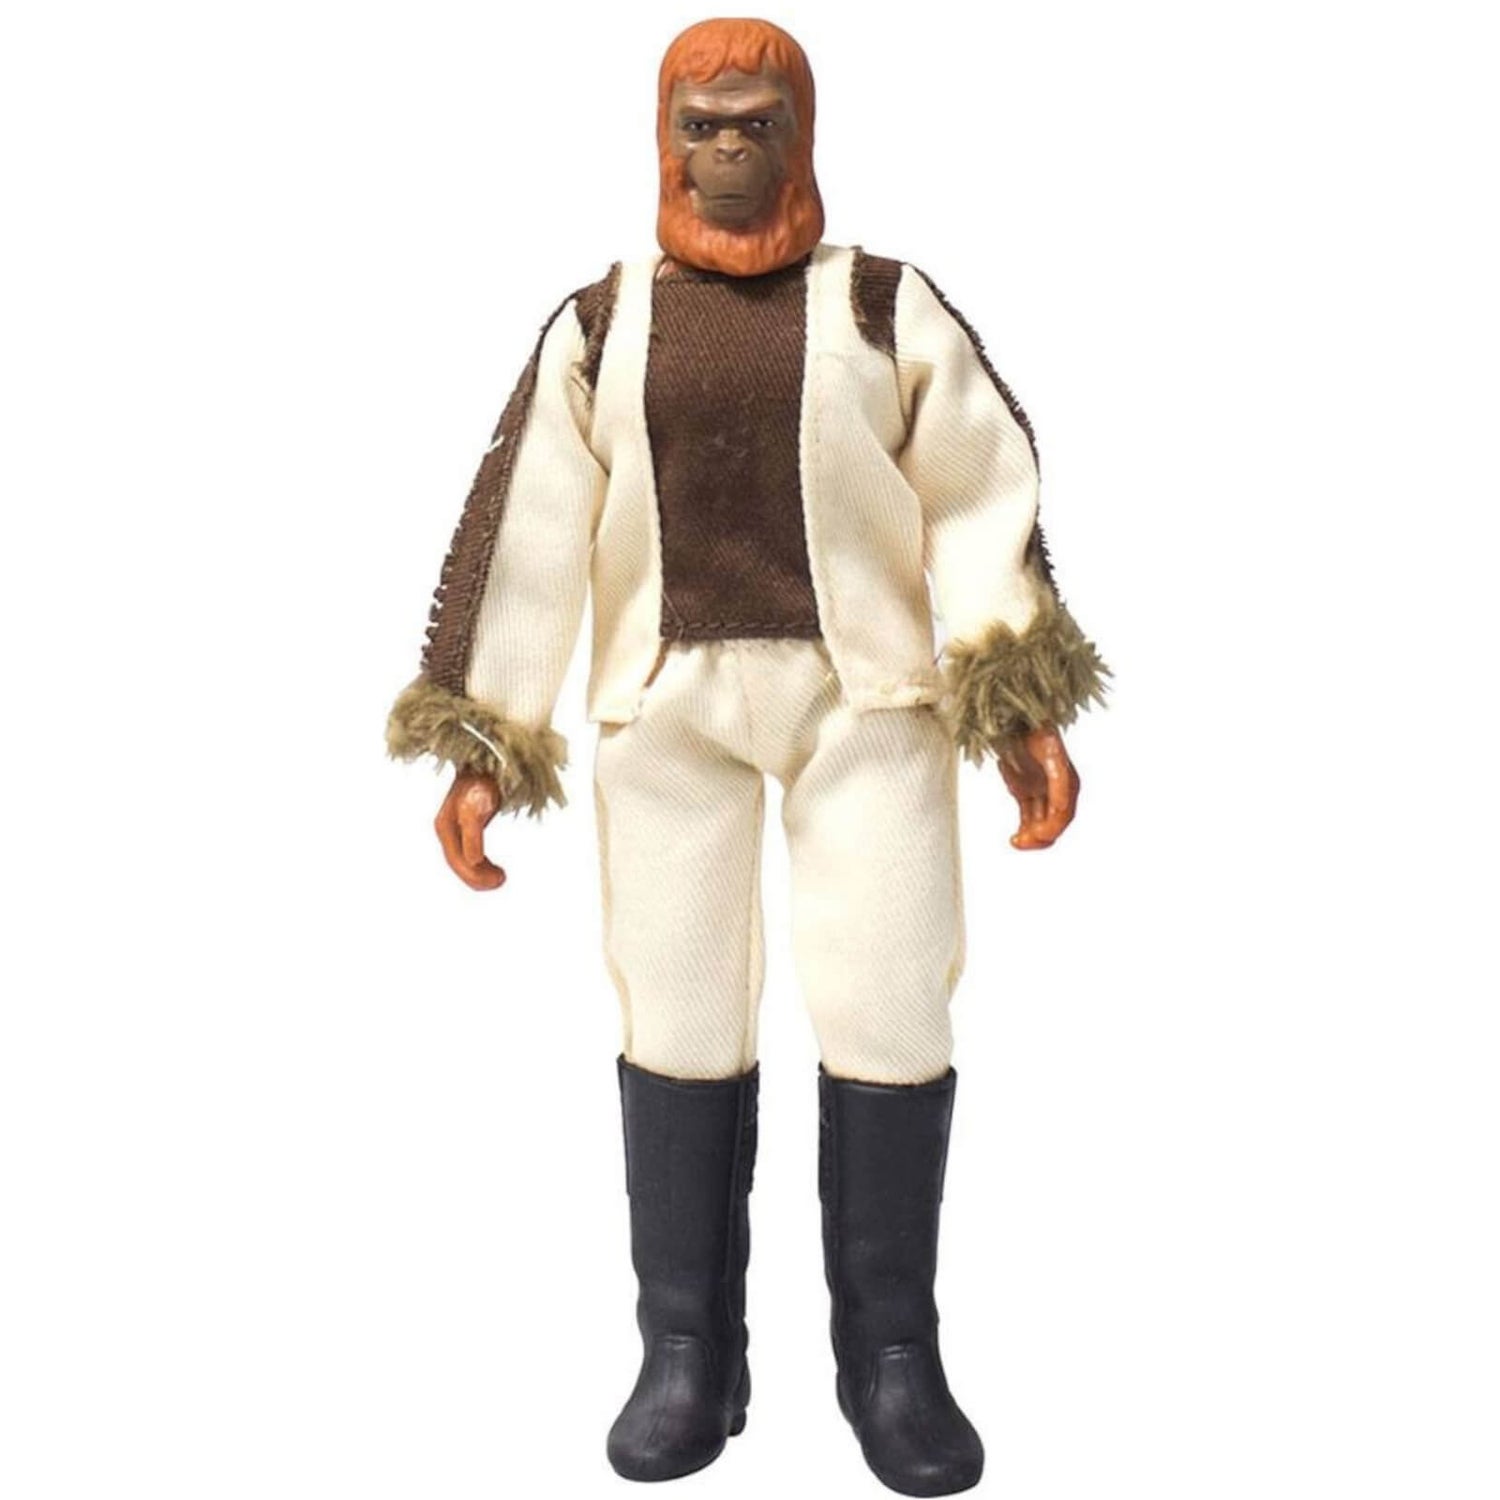 Mego 8 Inch Planet of the Apes Dr. Zaius Action Figure